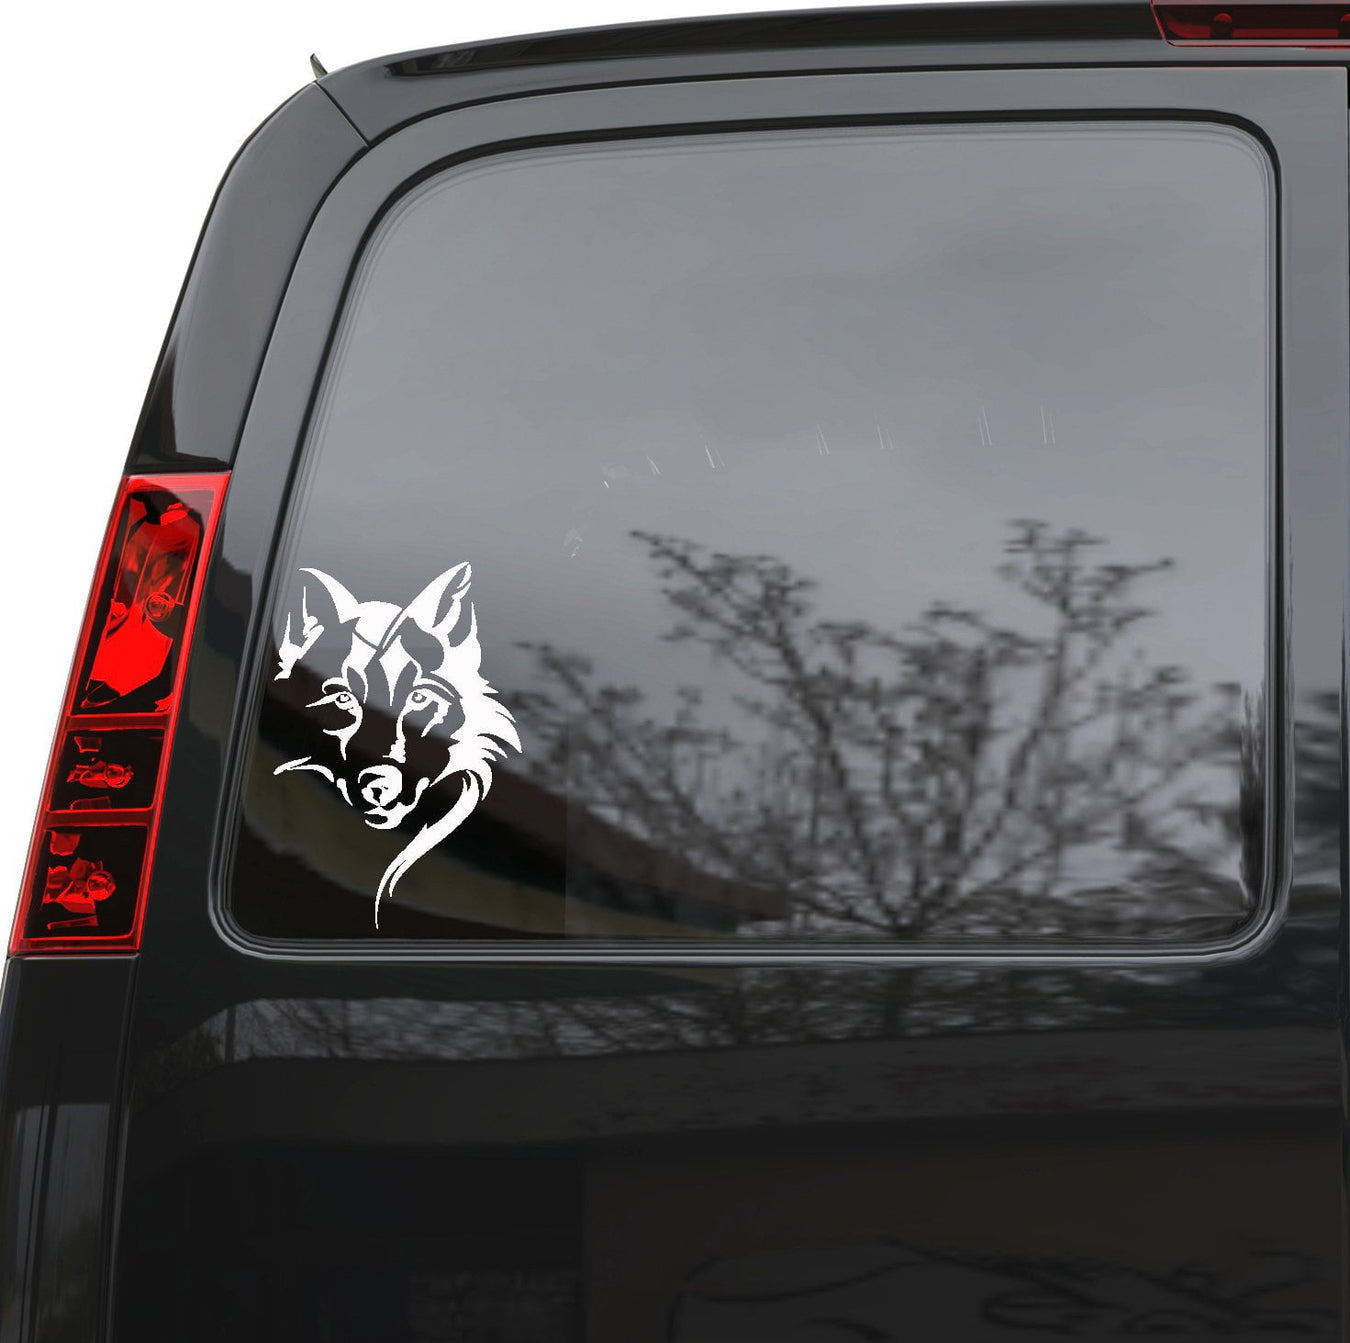 Car And Laptop Decals